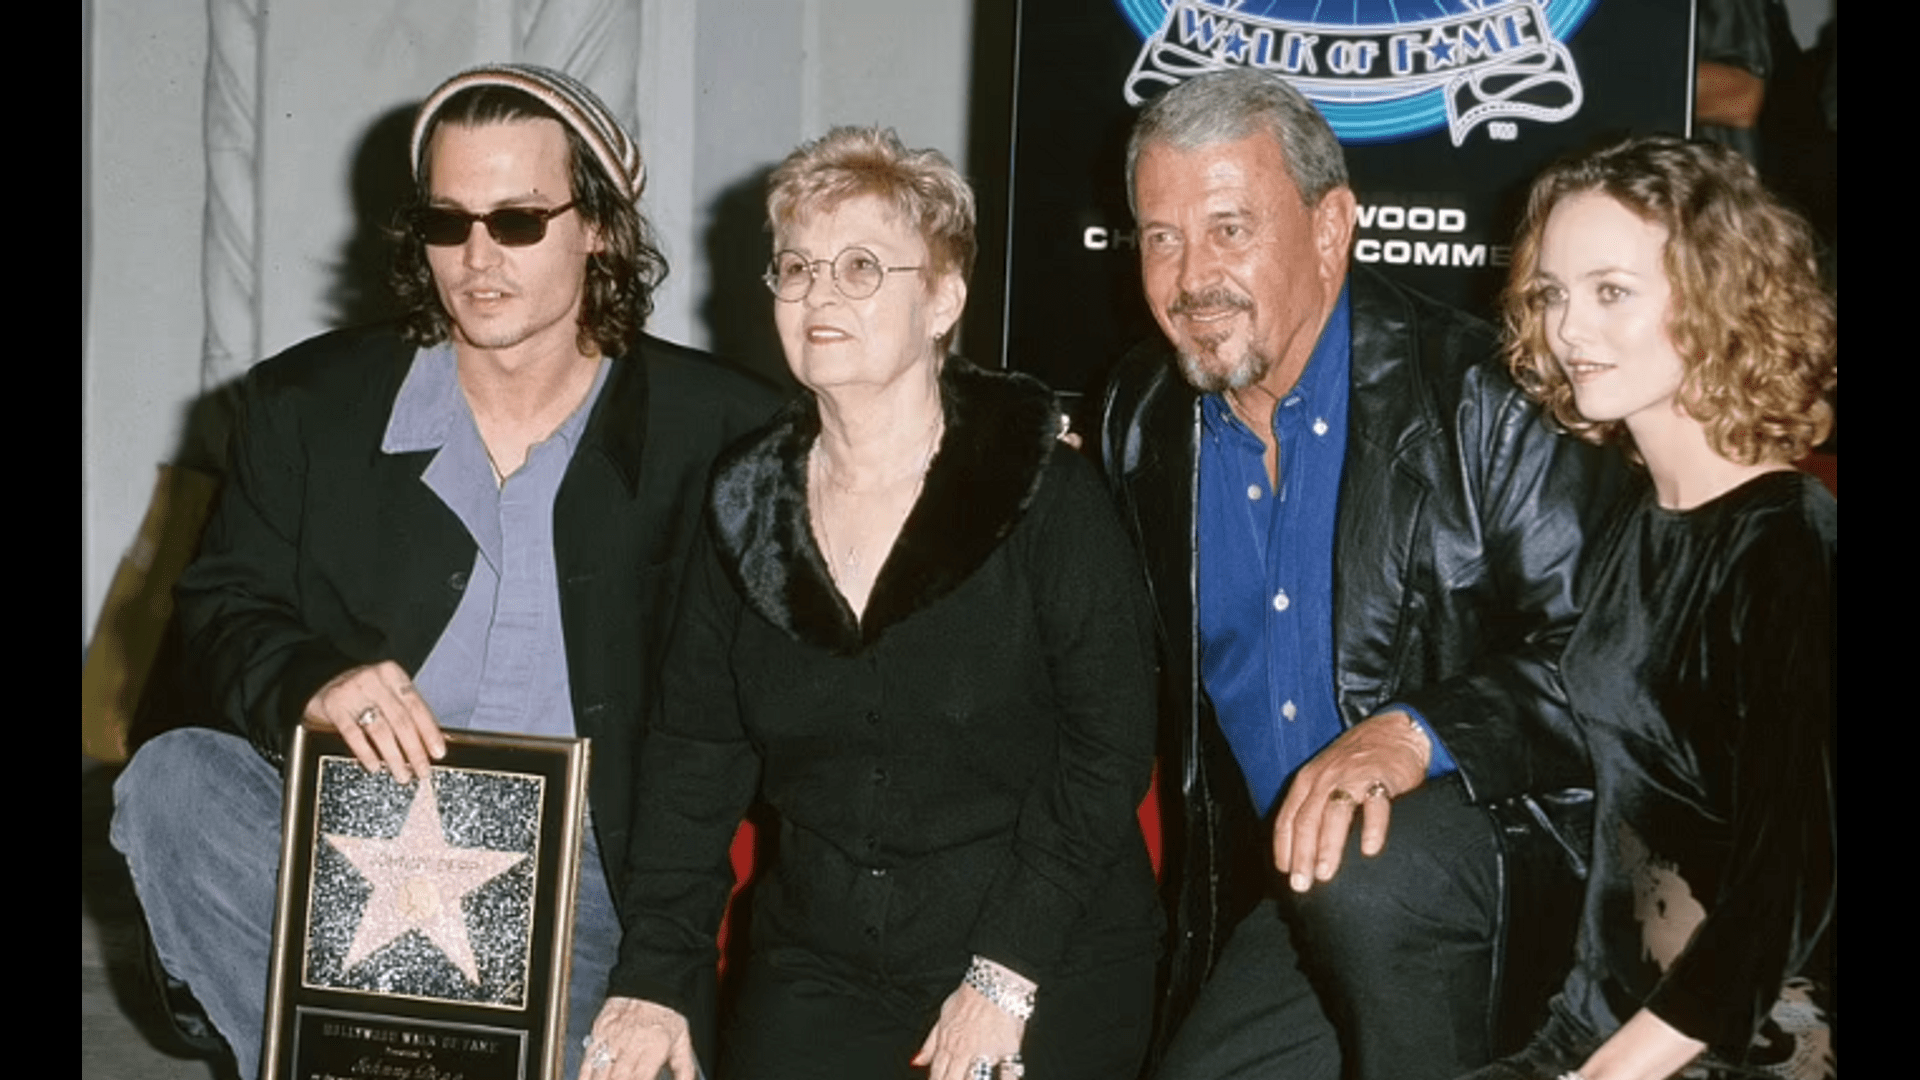 Johnny Depp opens up about his mother's abuse